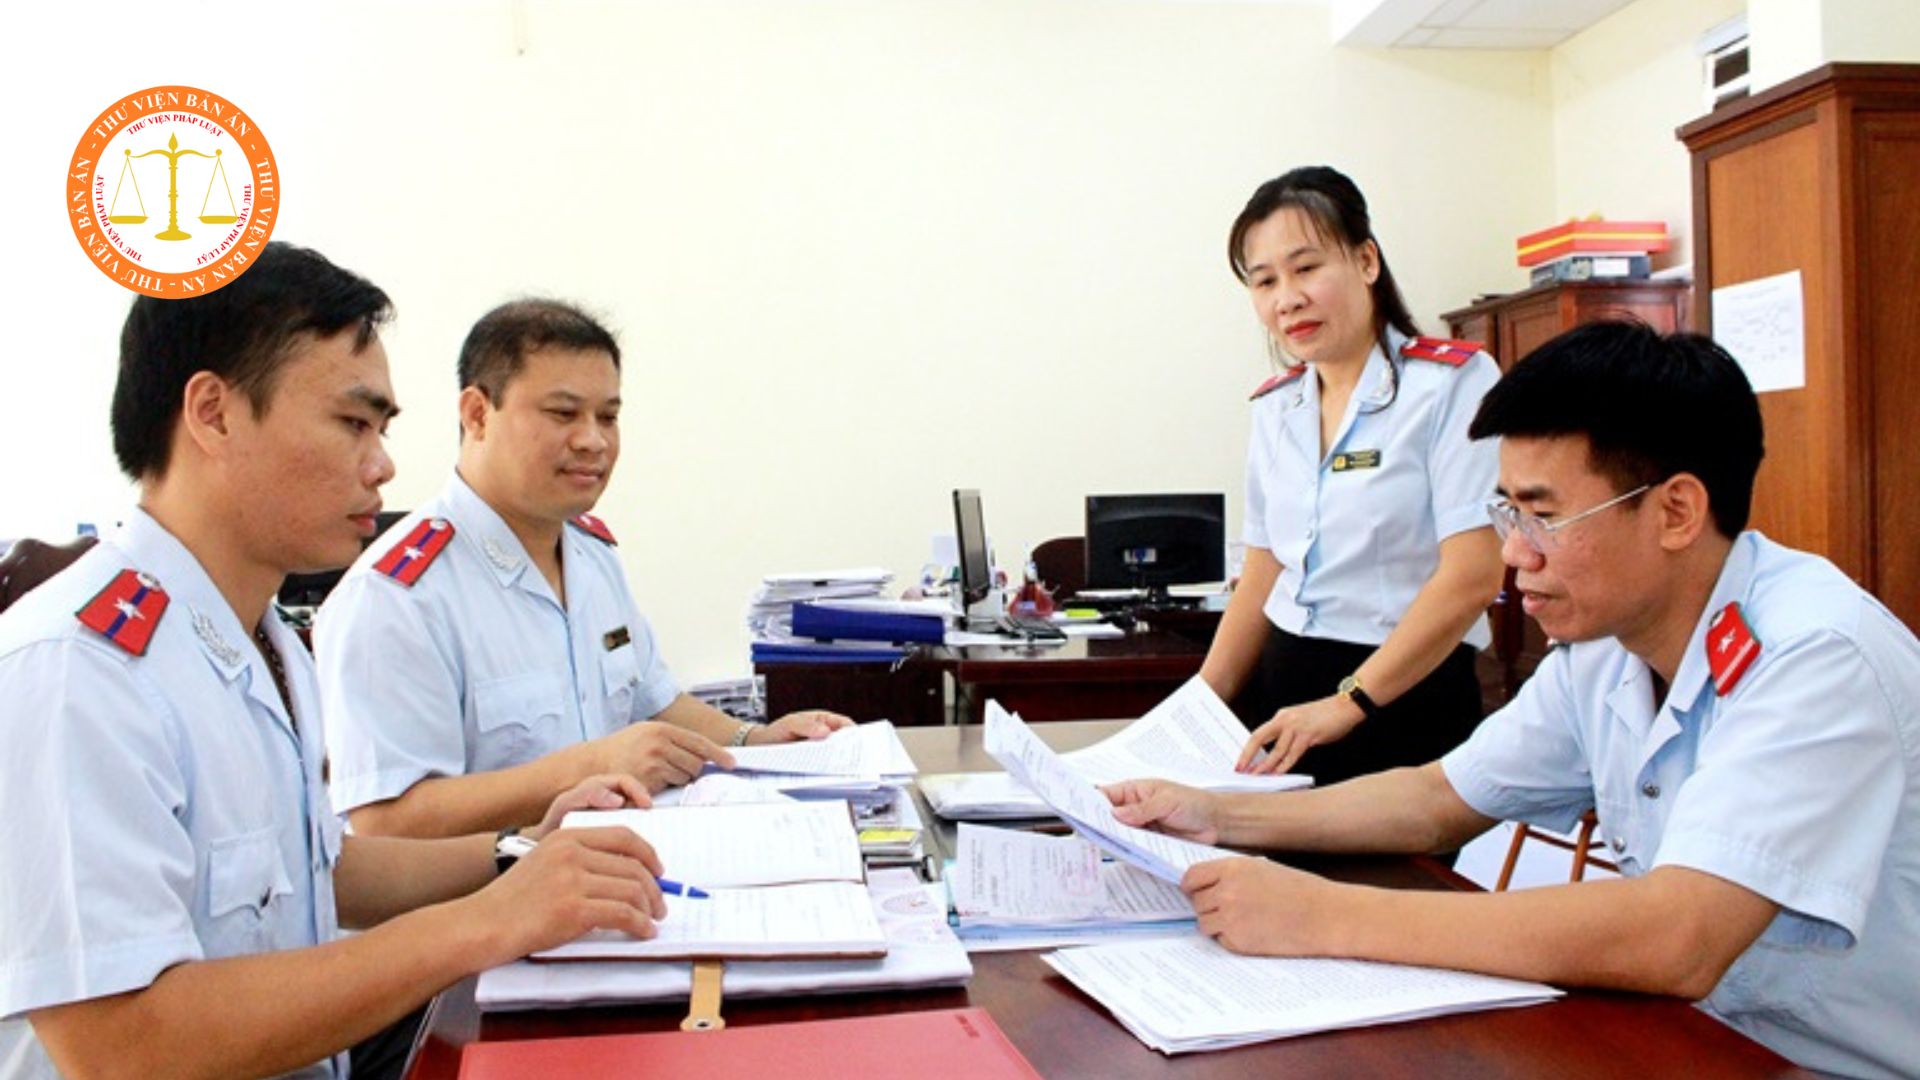 Criteria for appointment to inspectors in Vietnam